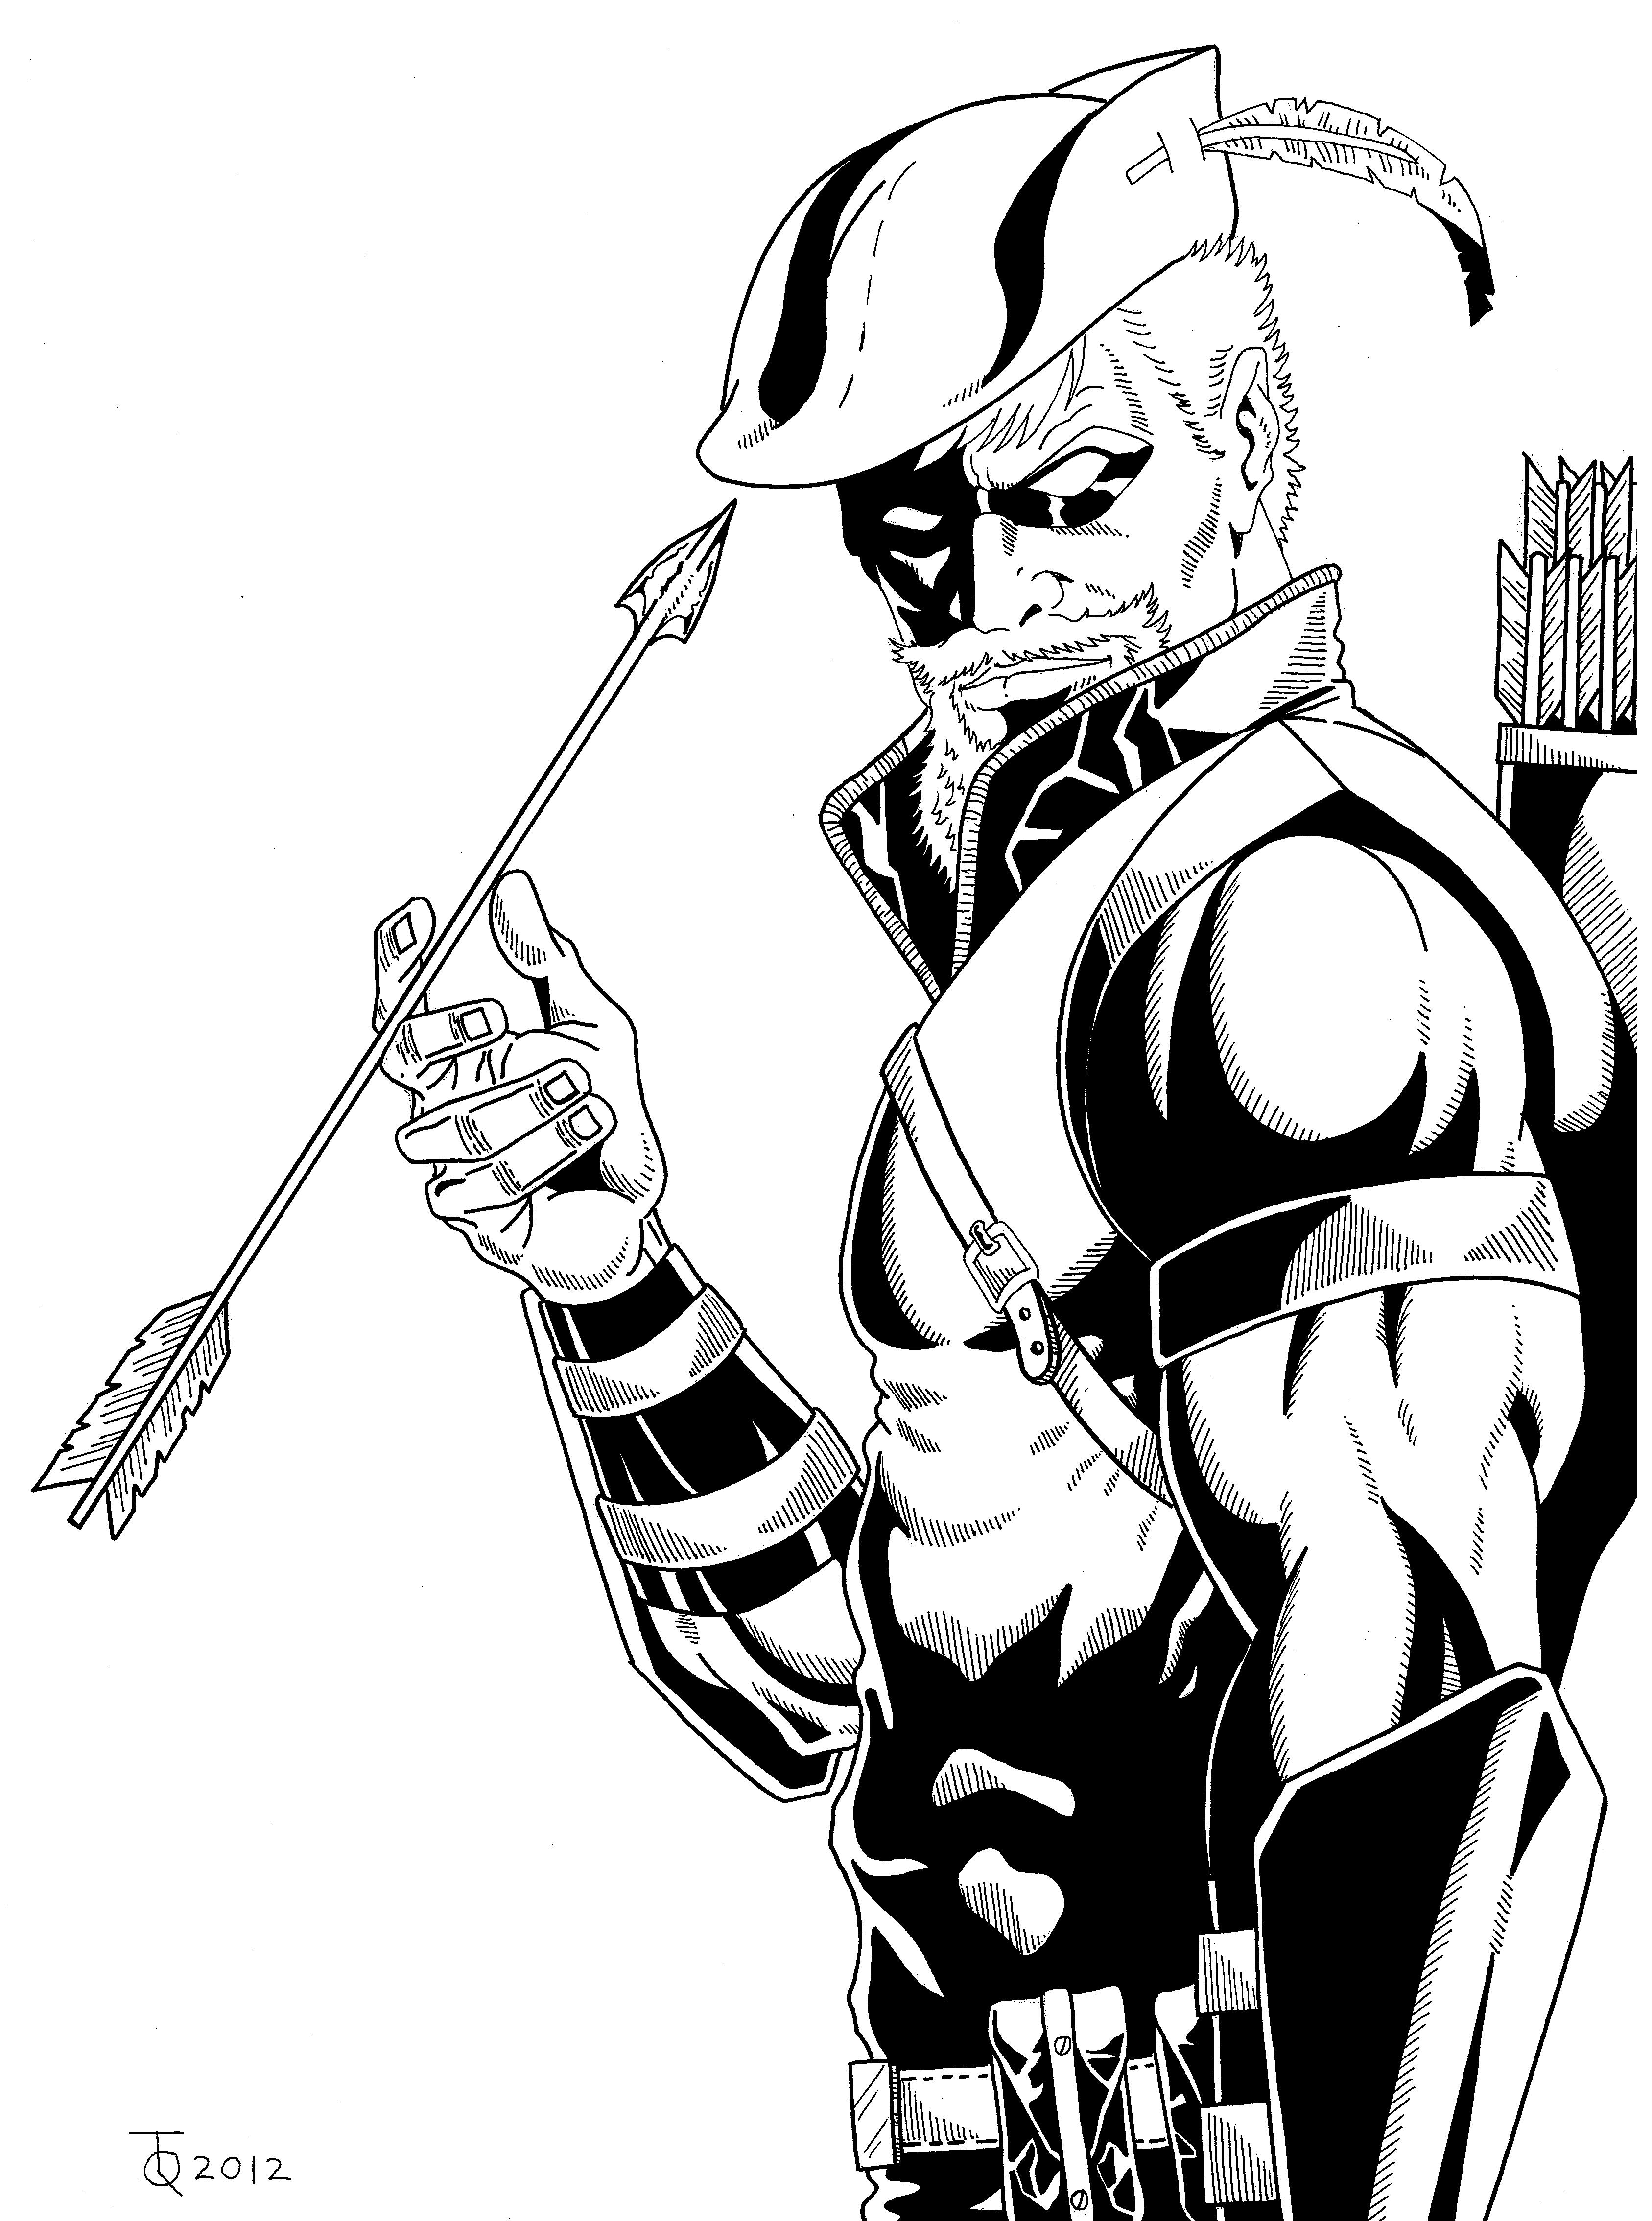 Green Arrow Drawing at GetDrawings.com | Free for personal use Green